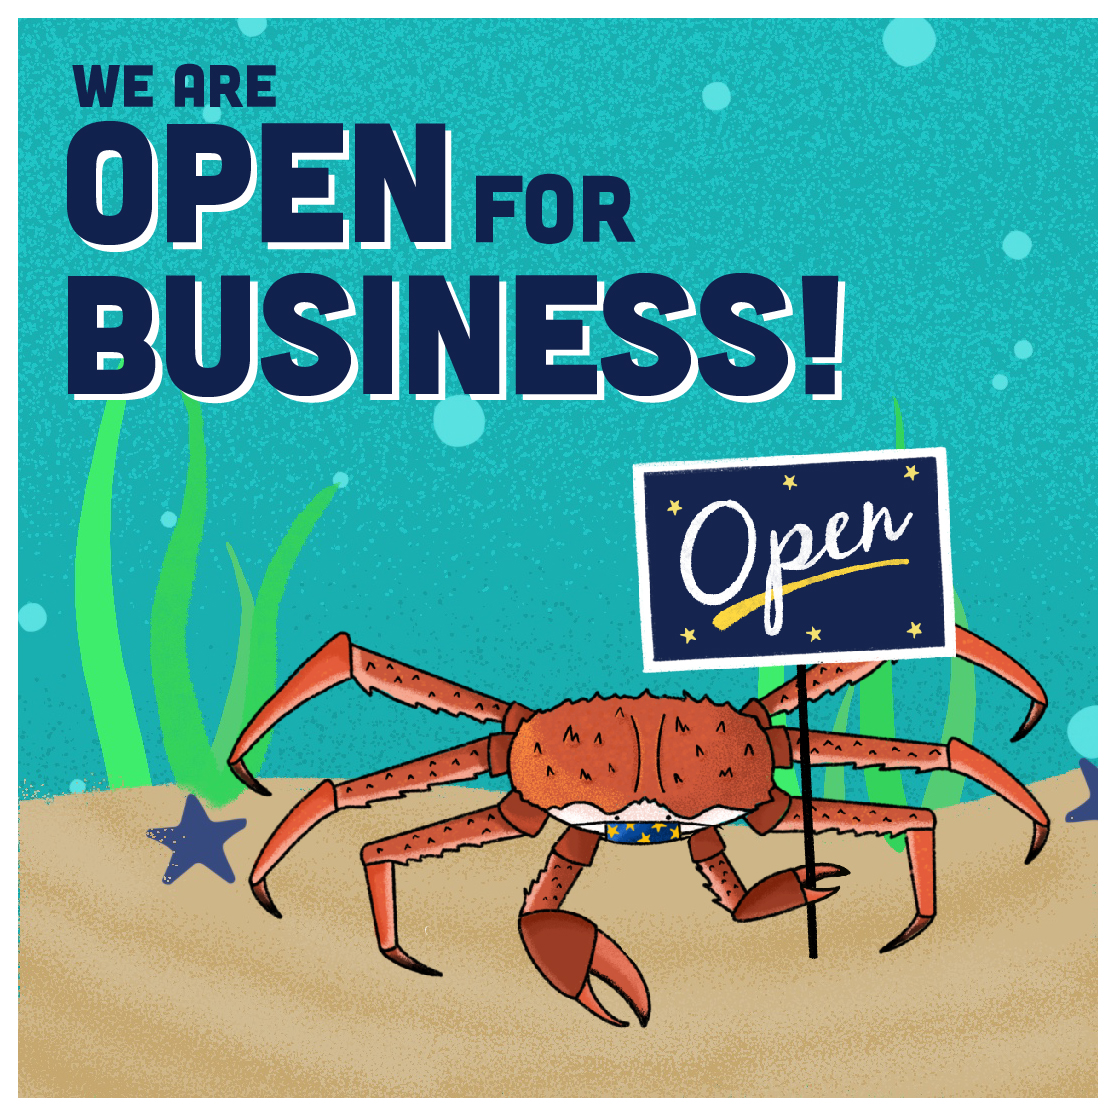 We are open for business!